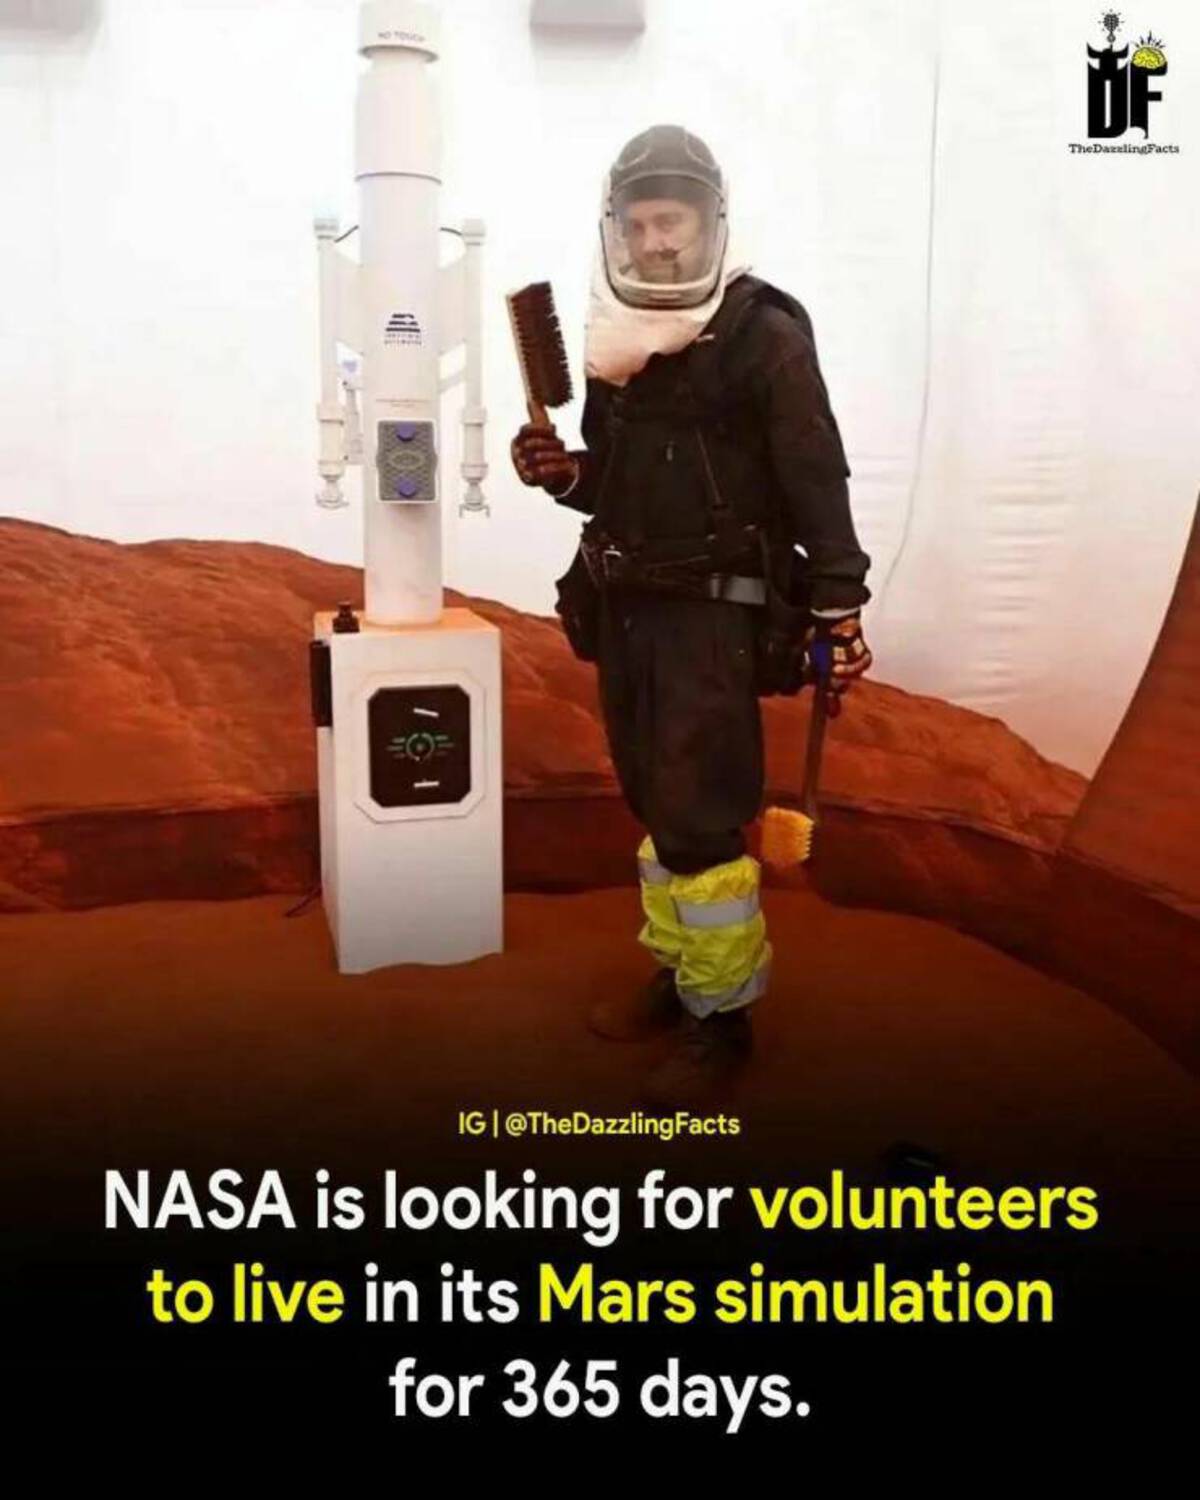 photo caption - I TheDazzlingFacts Ig Facts Nasa is looking for volunteers to live in its Mars simulation for 365 days.